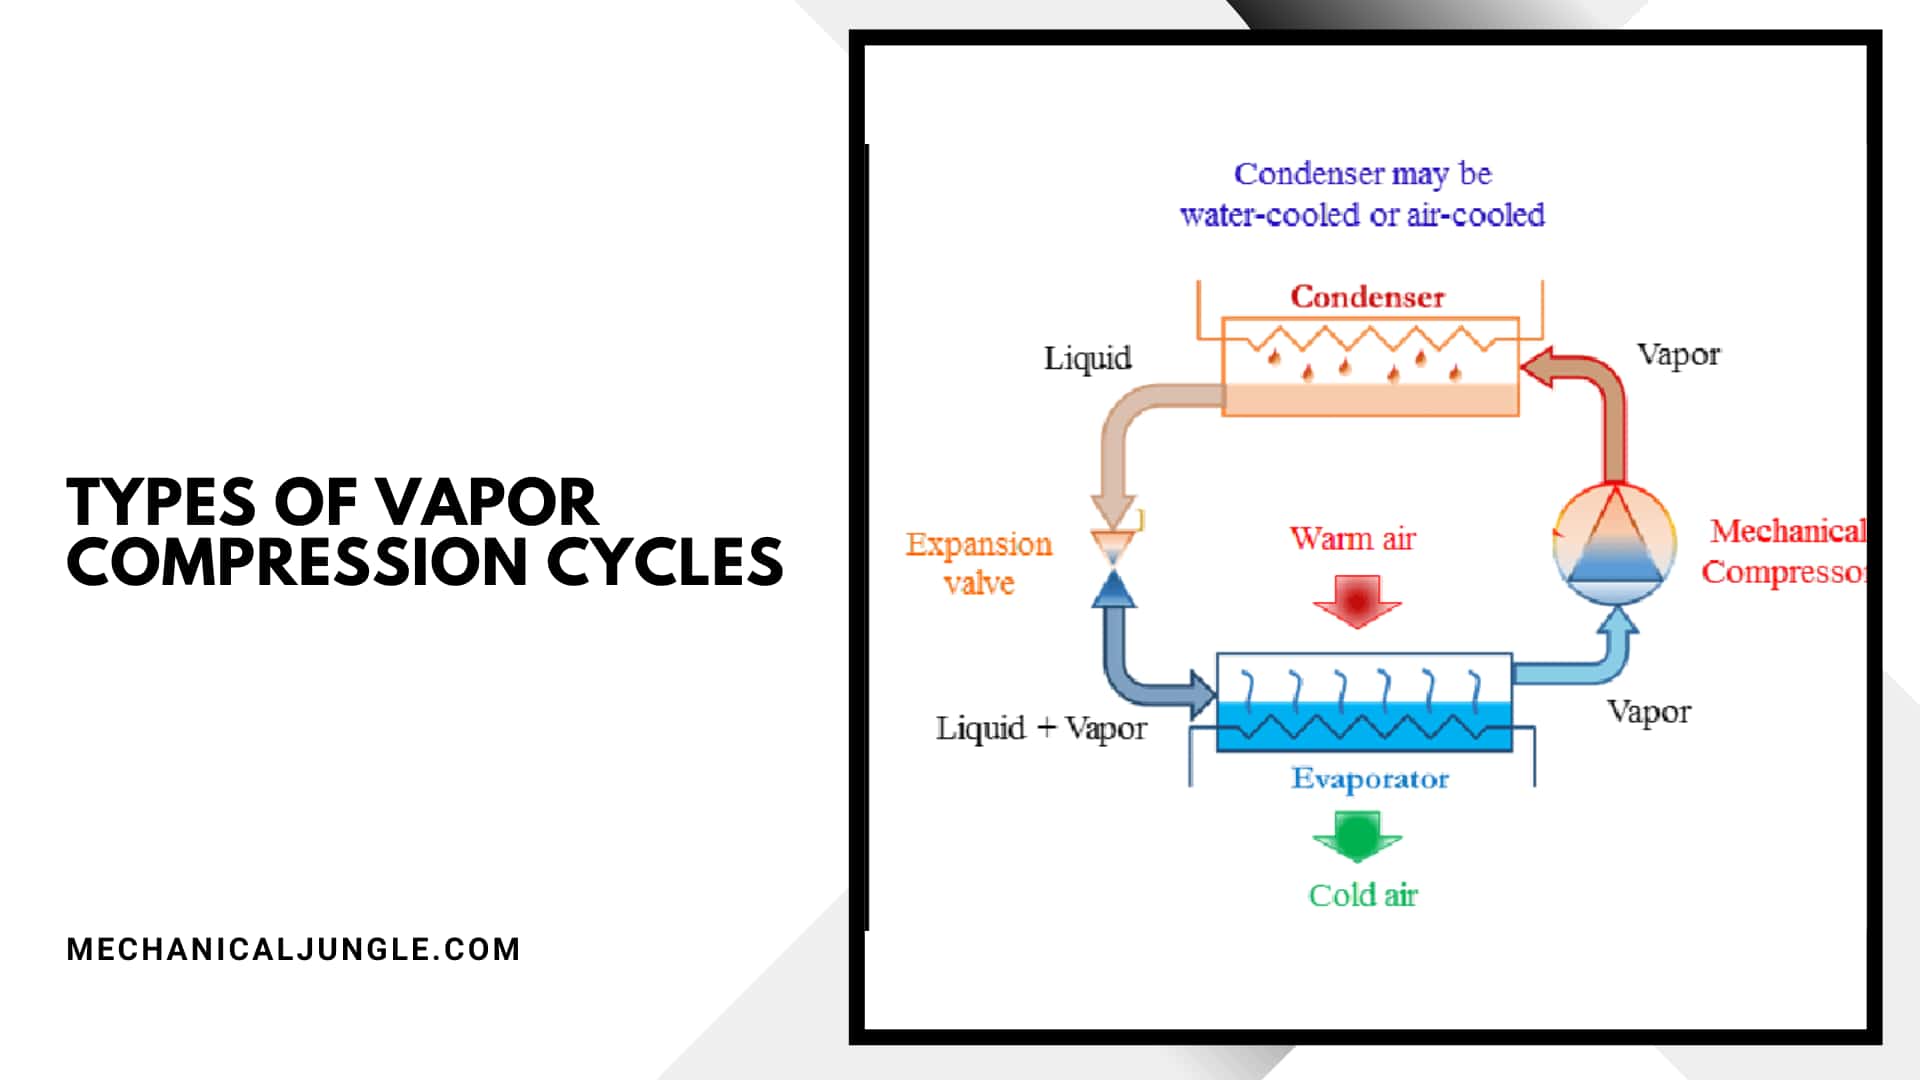 Types of Vapor Compression Cycles